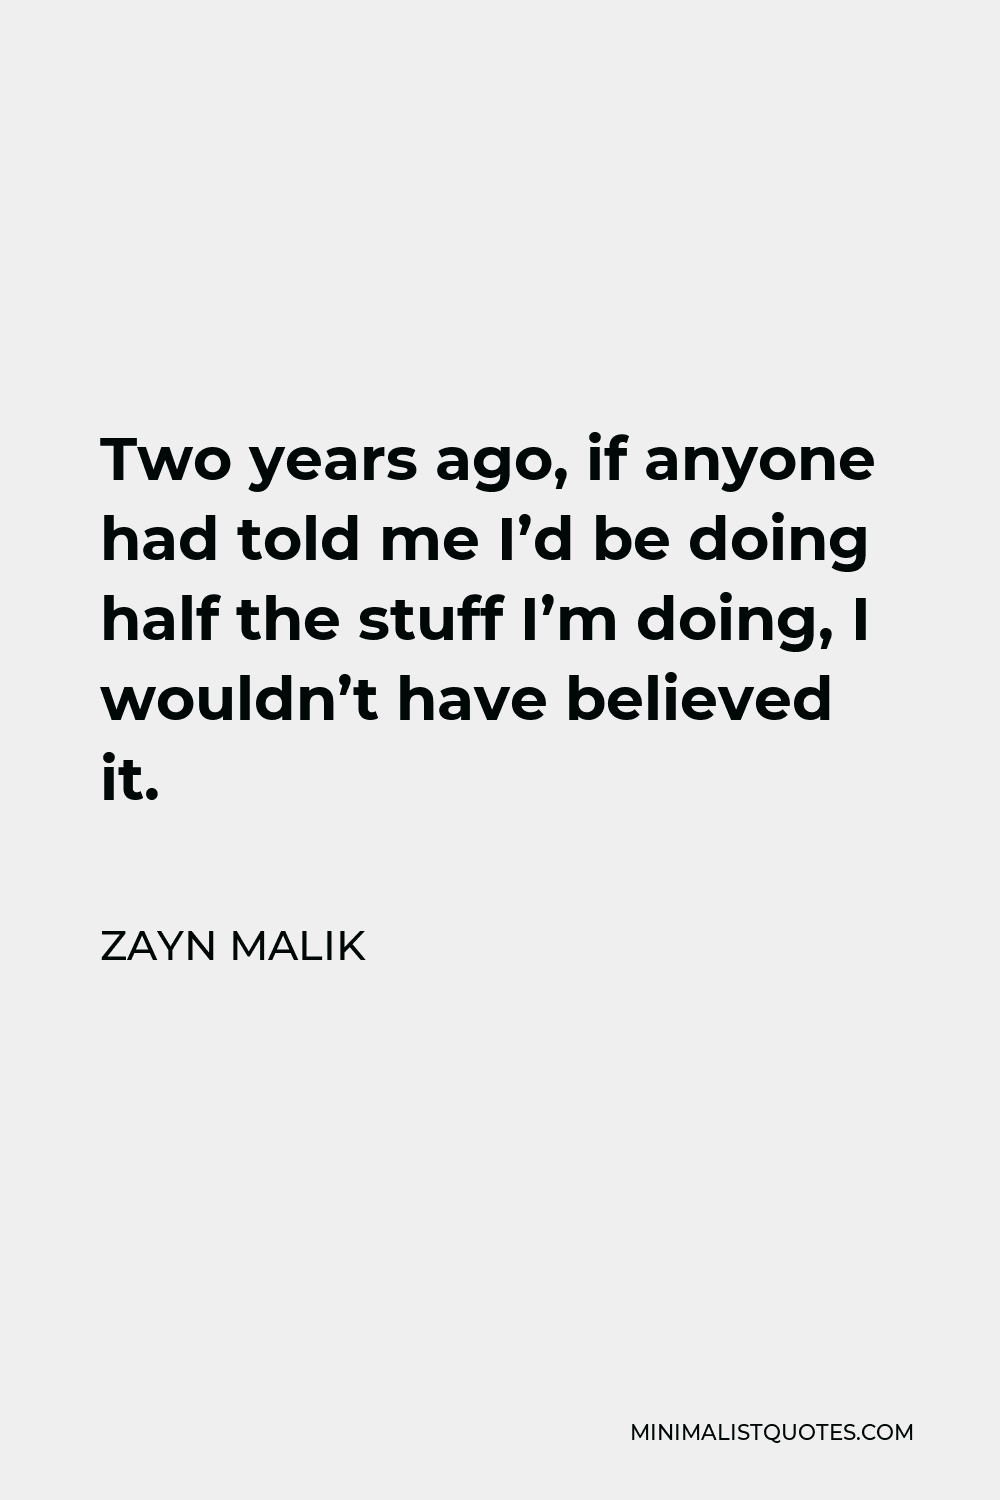 Zayn Malik Quote - Two years ago, if anyone had told me I’d be doing half the stuff I’m doing, I wouldn’t have believed it.